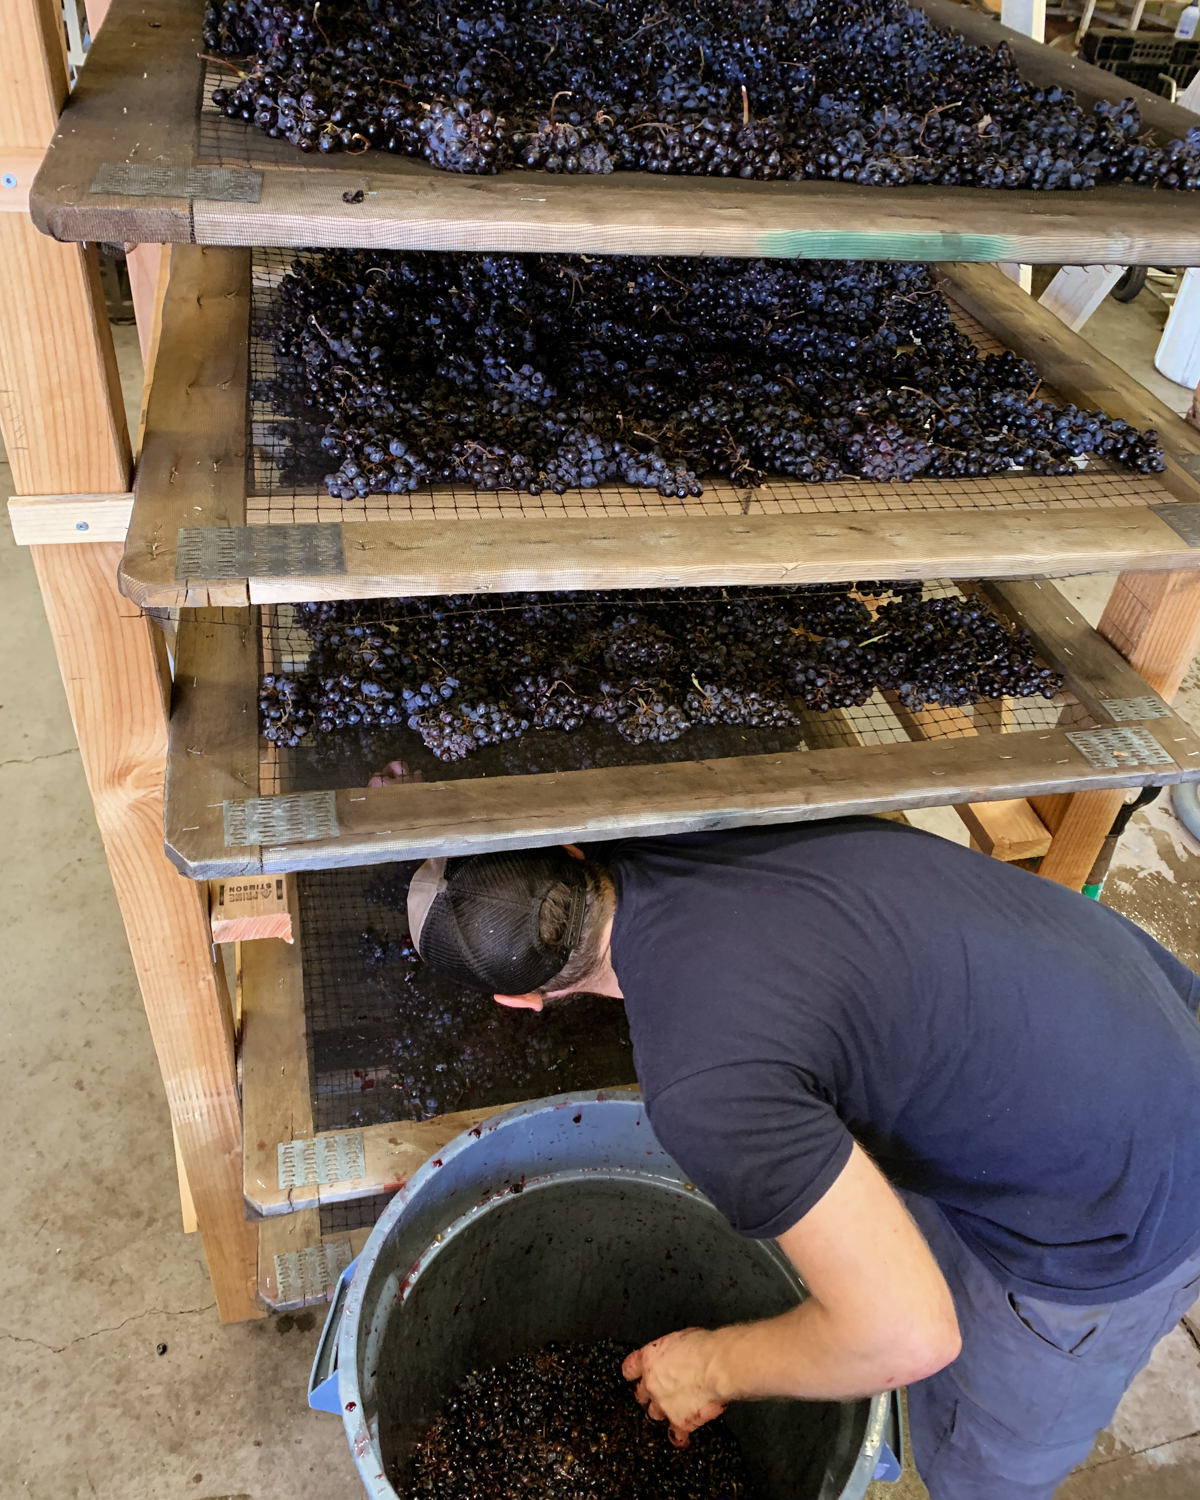 Matteo evaluating grapes for his appassimento project.